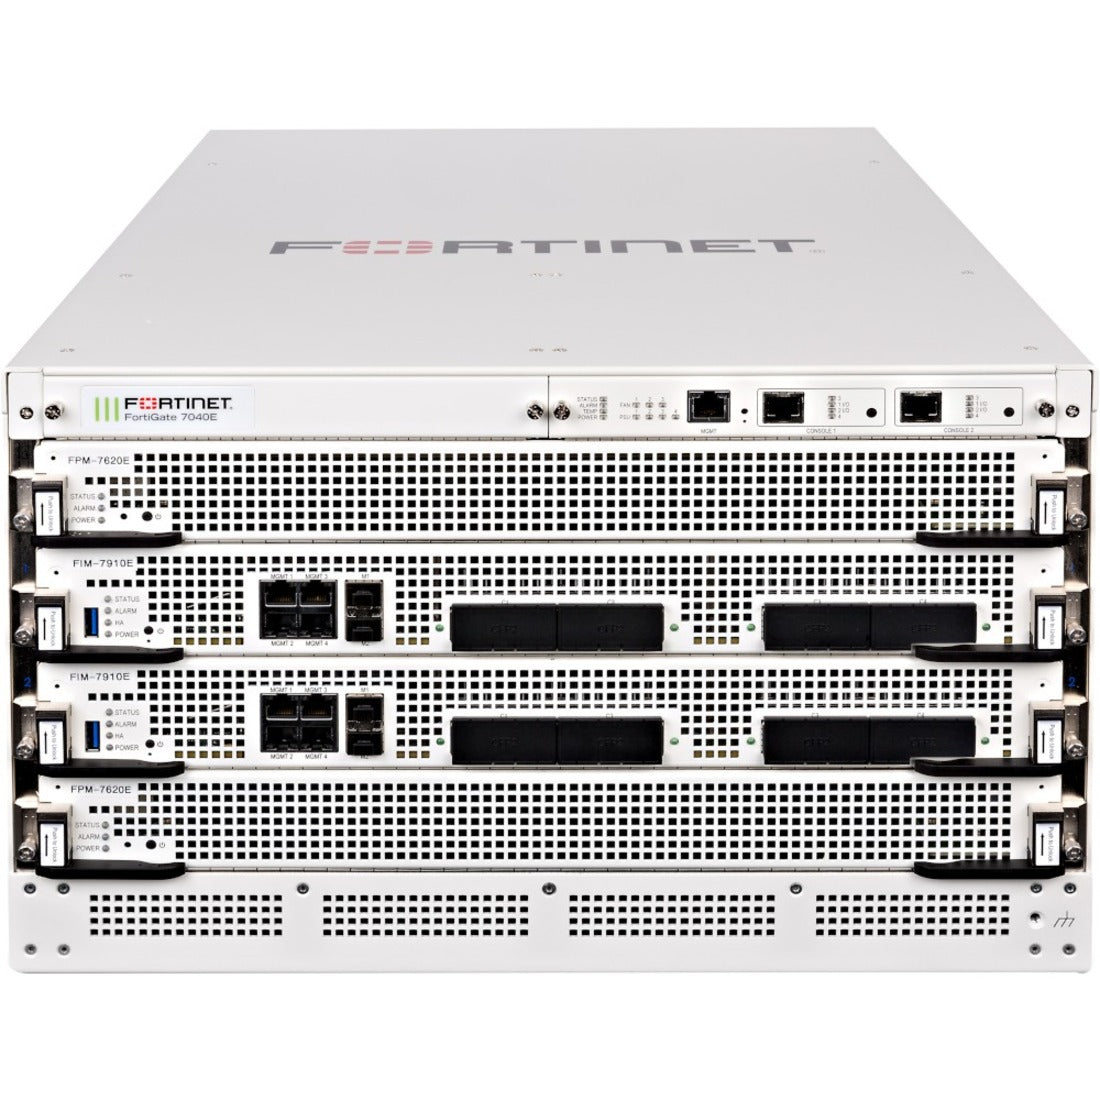 Fortinet FG-7040E-9 FortiGate Network Security/Firewall Appliance, 48000 VPN Supported, 6U Rack-mountable